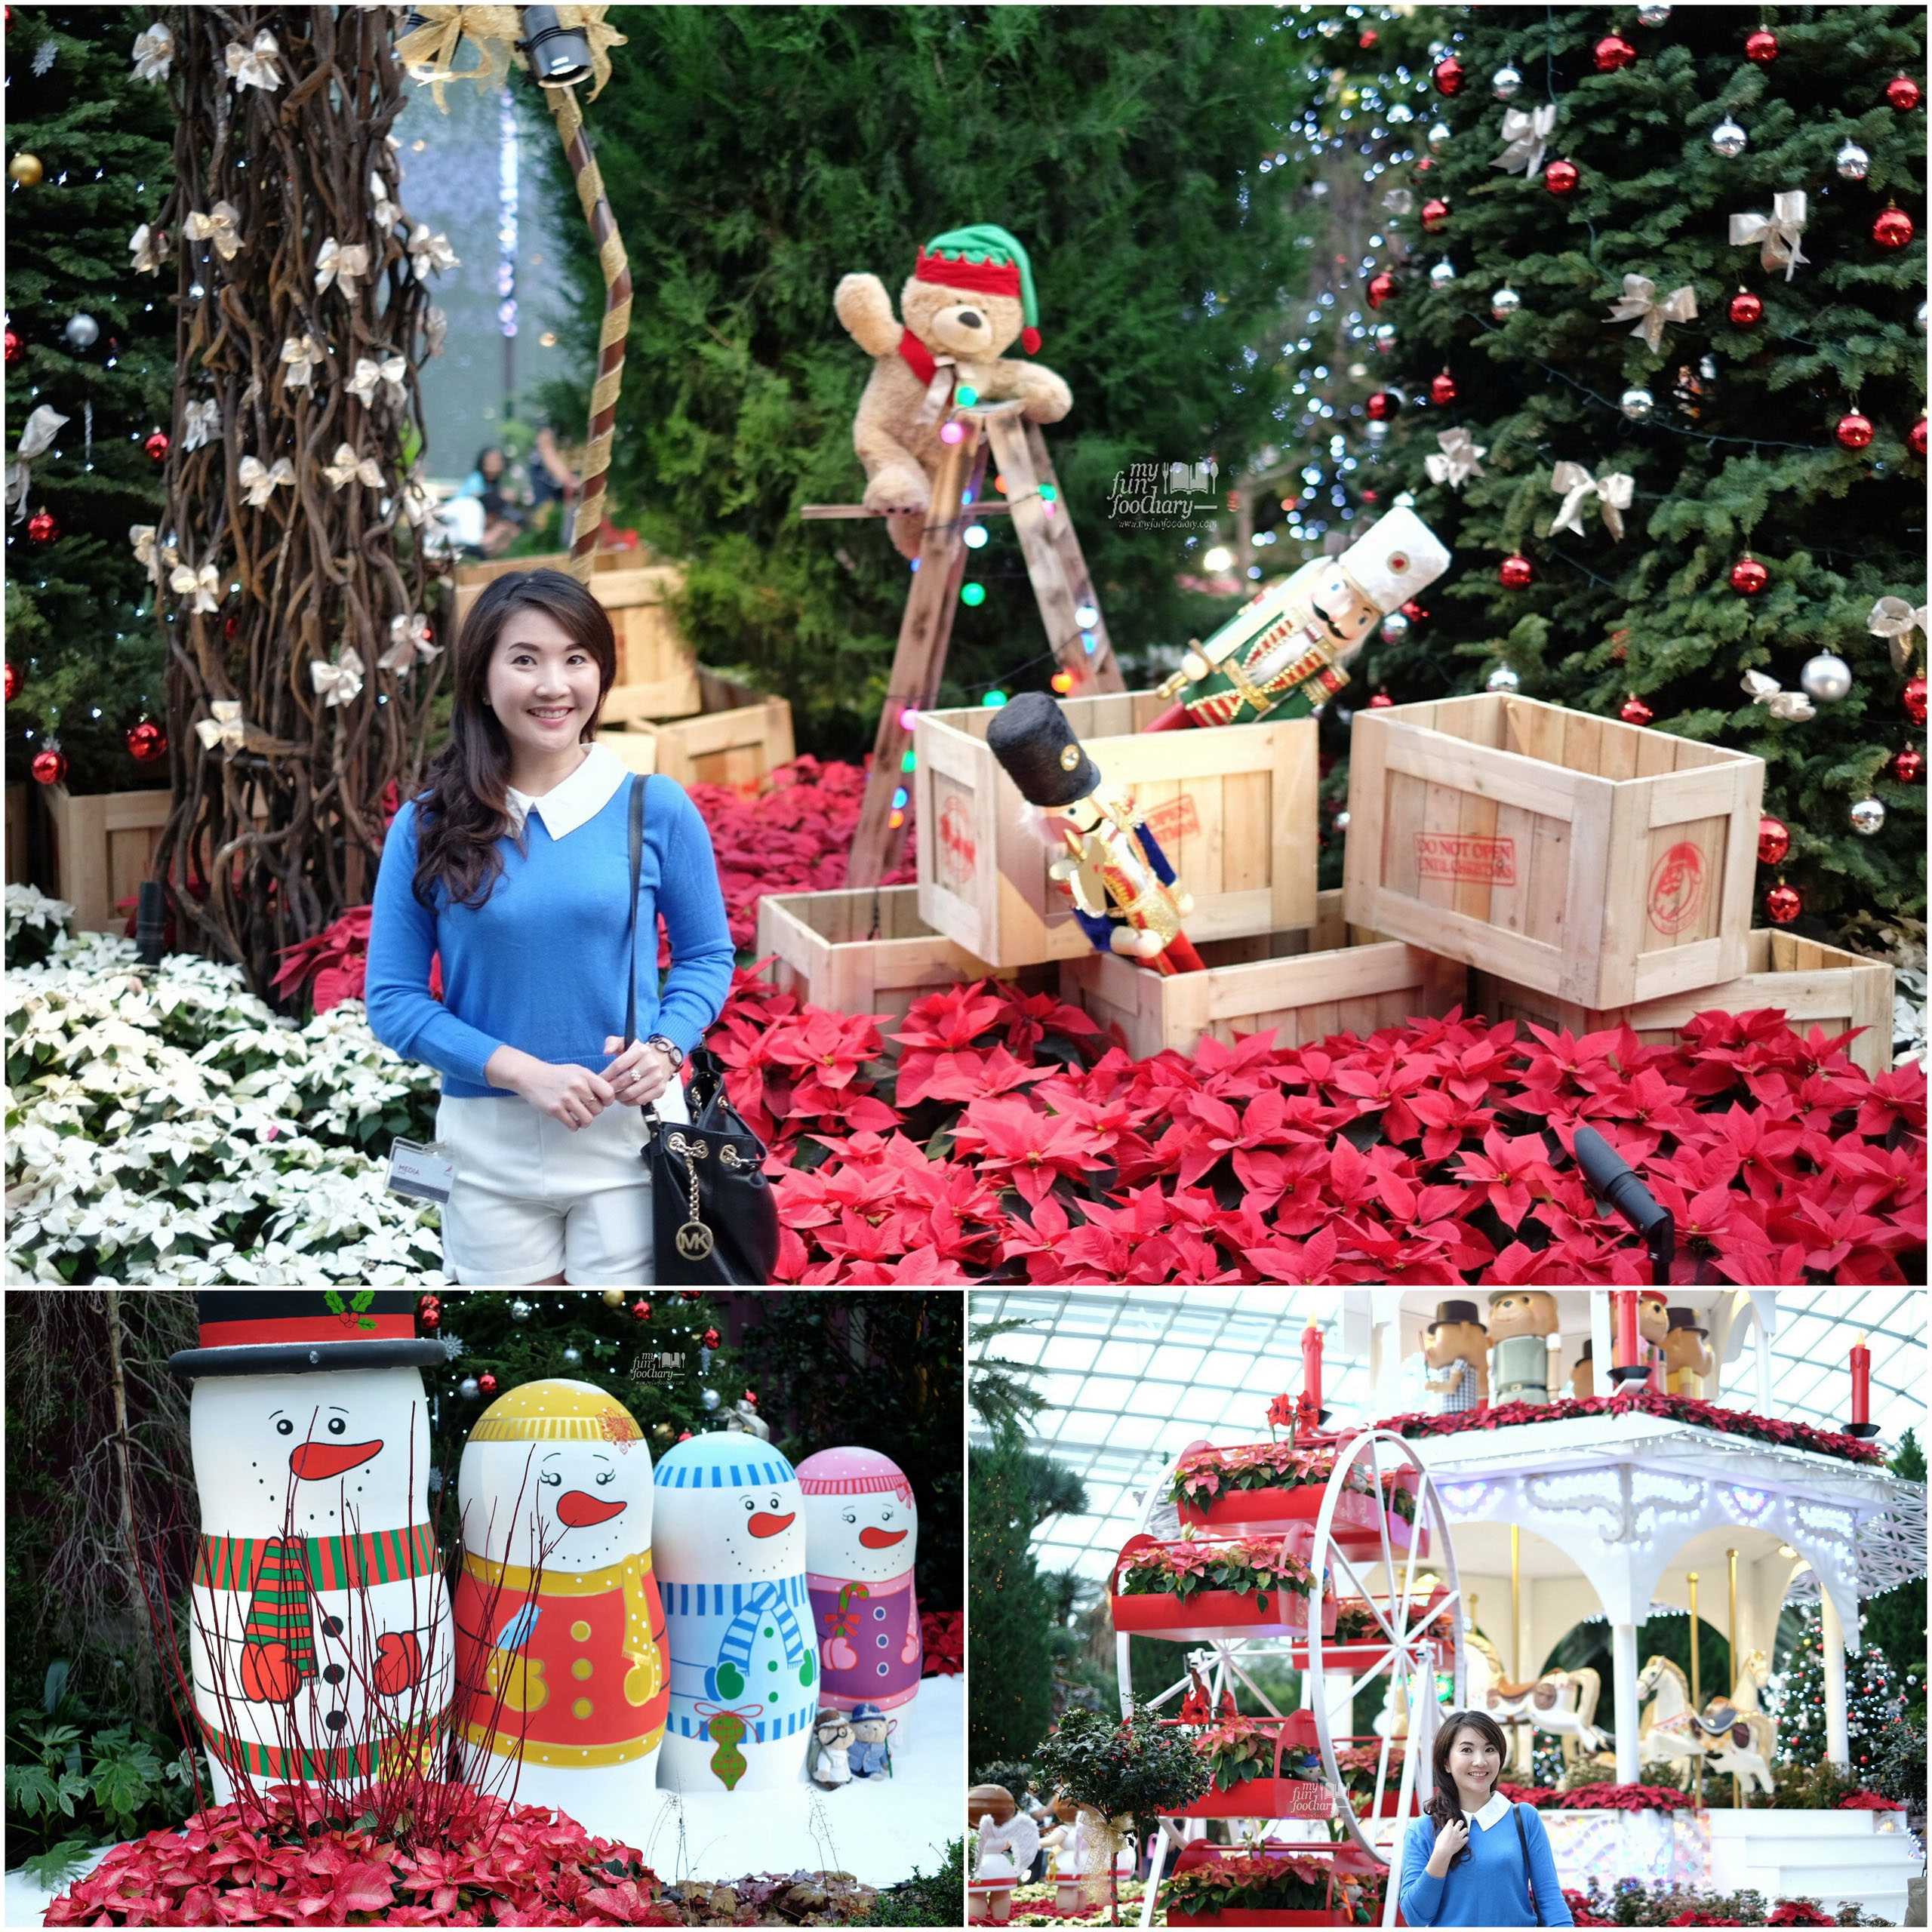 Cute Decorations Christmas Toyland at Gardens By The Bay 2015 by Myfunfoodiary